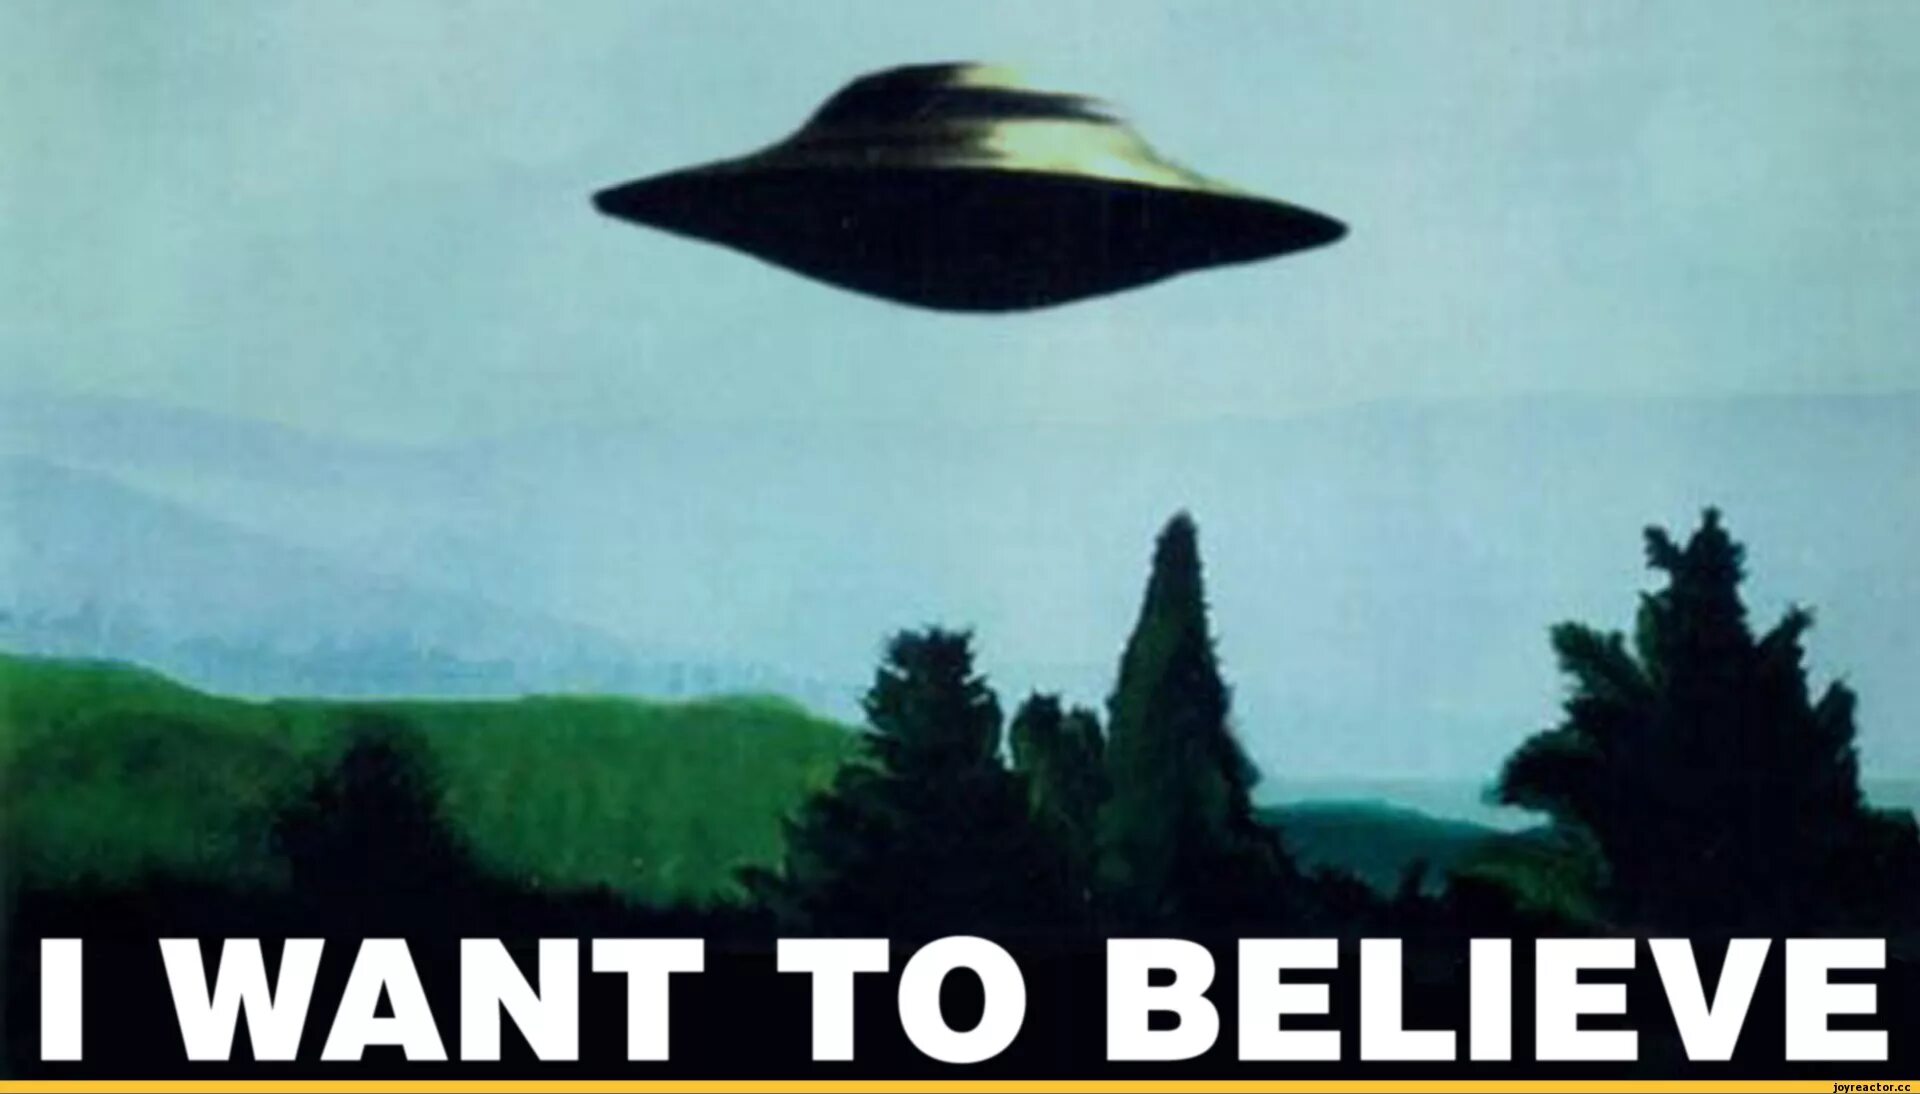 We wanted to know who. I want to believe из секретных материалов. Секретные материалы Постер i want to believe. НЛО I want to believe.